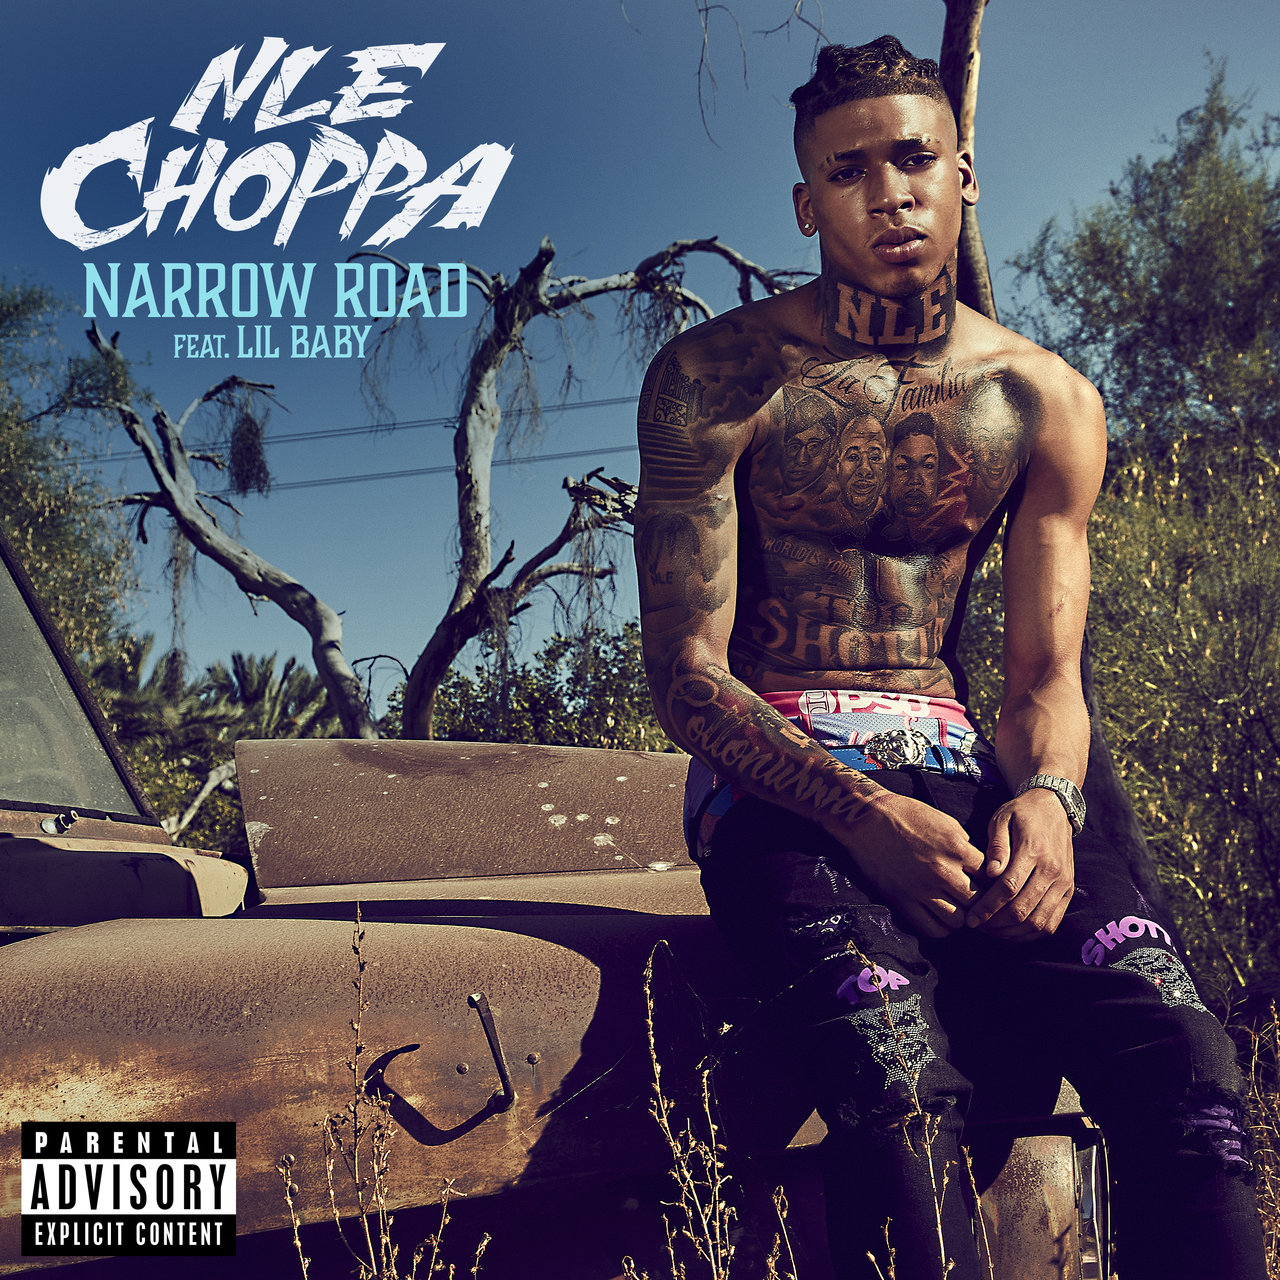 NLE Choppa - Narrow Road (ft. Lil Baby) (Cover)